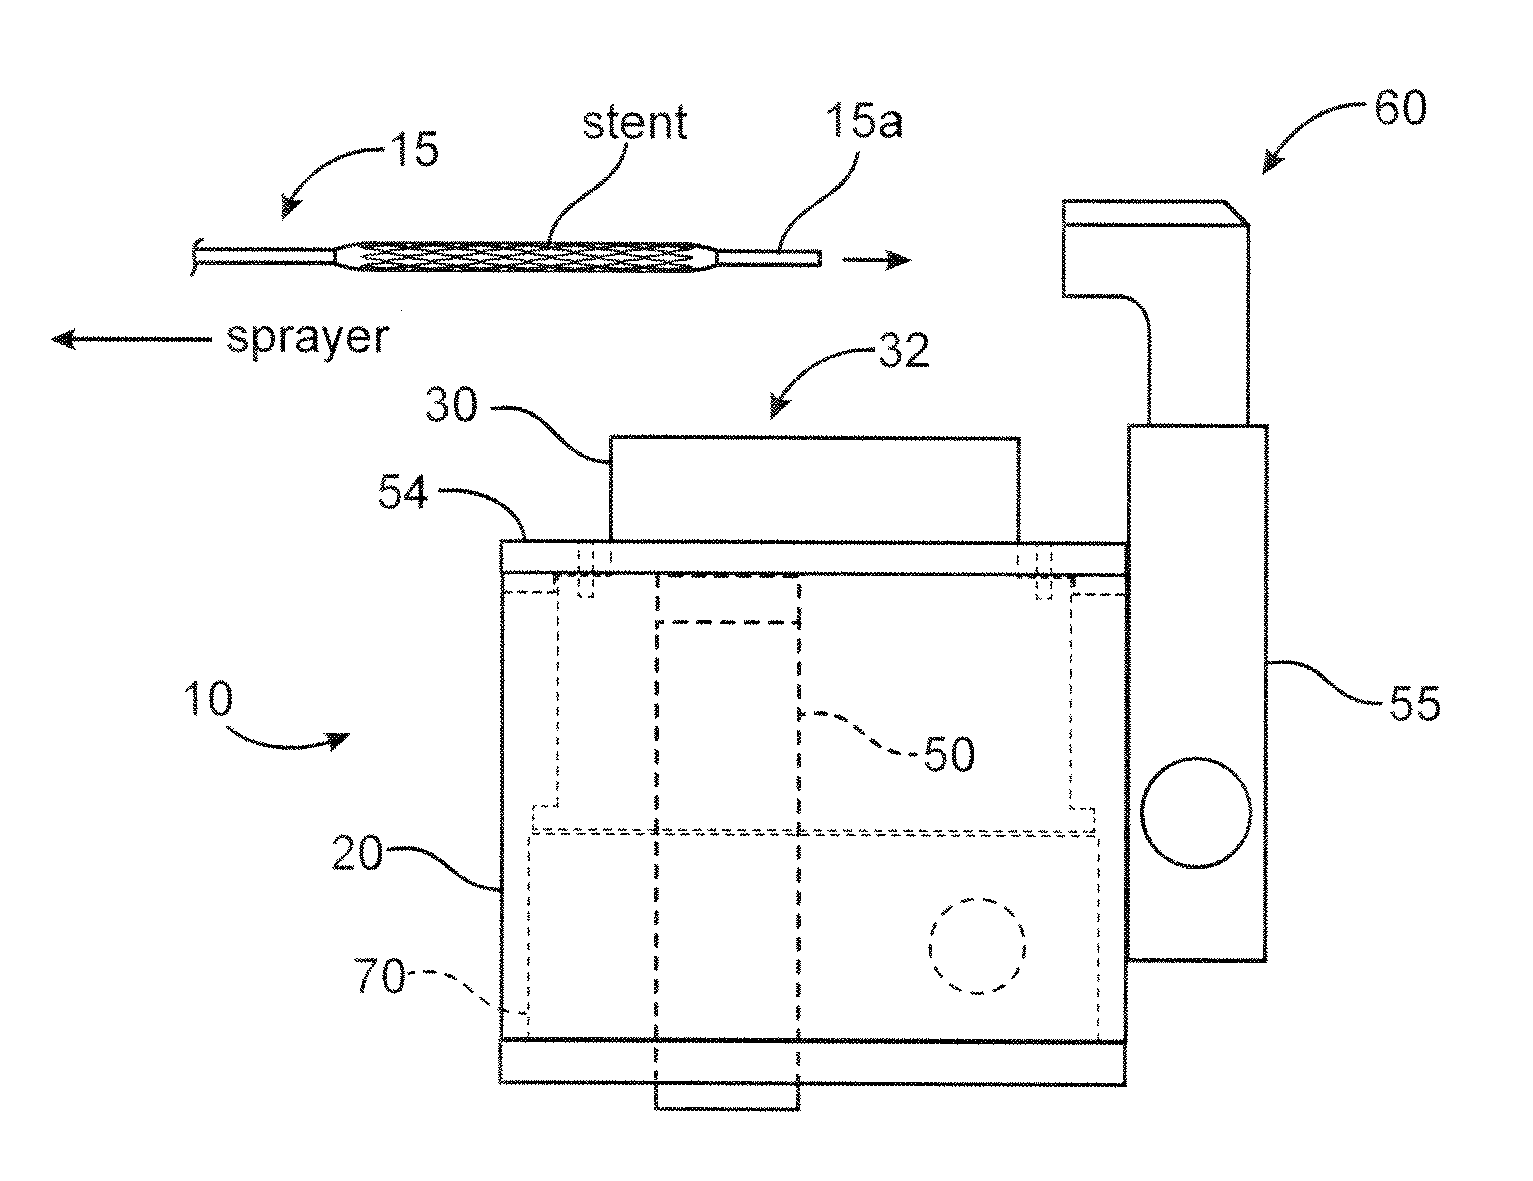 Dryers For Removing Solvent From A Drug-Eluting Coating Applied To Medical Devices